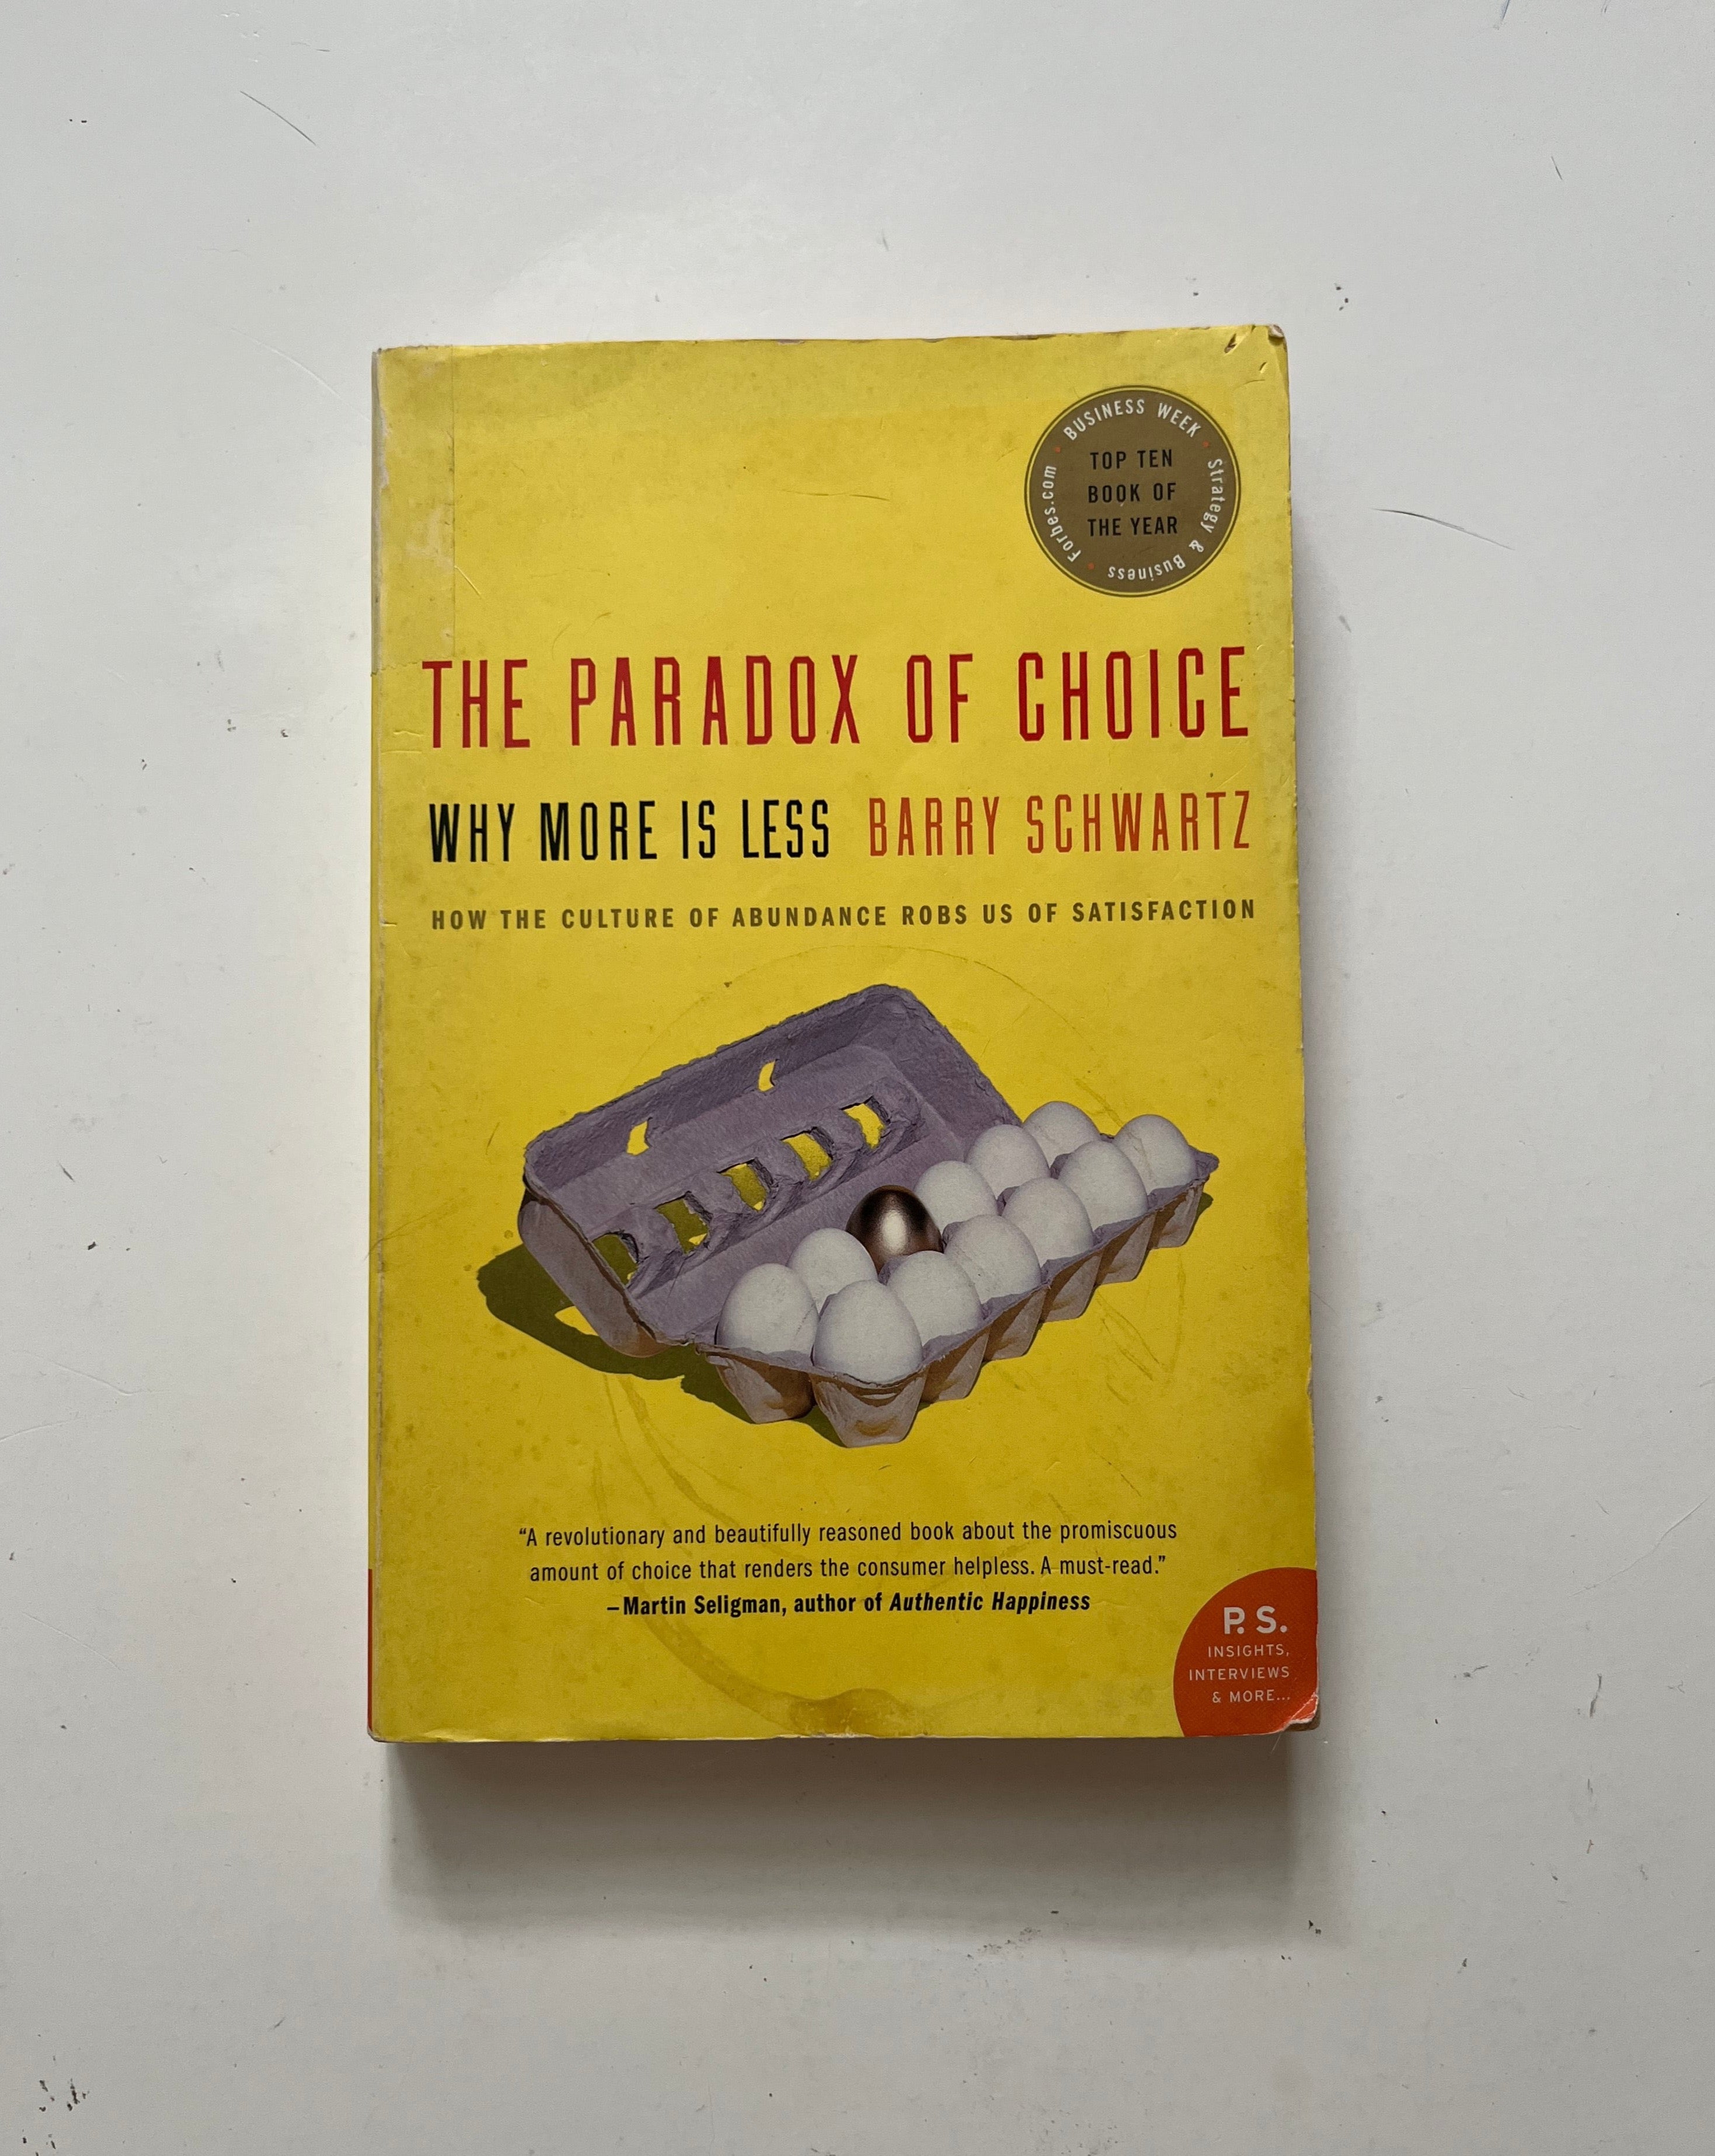 Dollar　Choice:　of　Abundance　(How　Paradox　Ten　Culture　of　More　The　the　Less　Why　is　Books